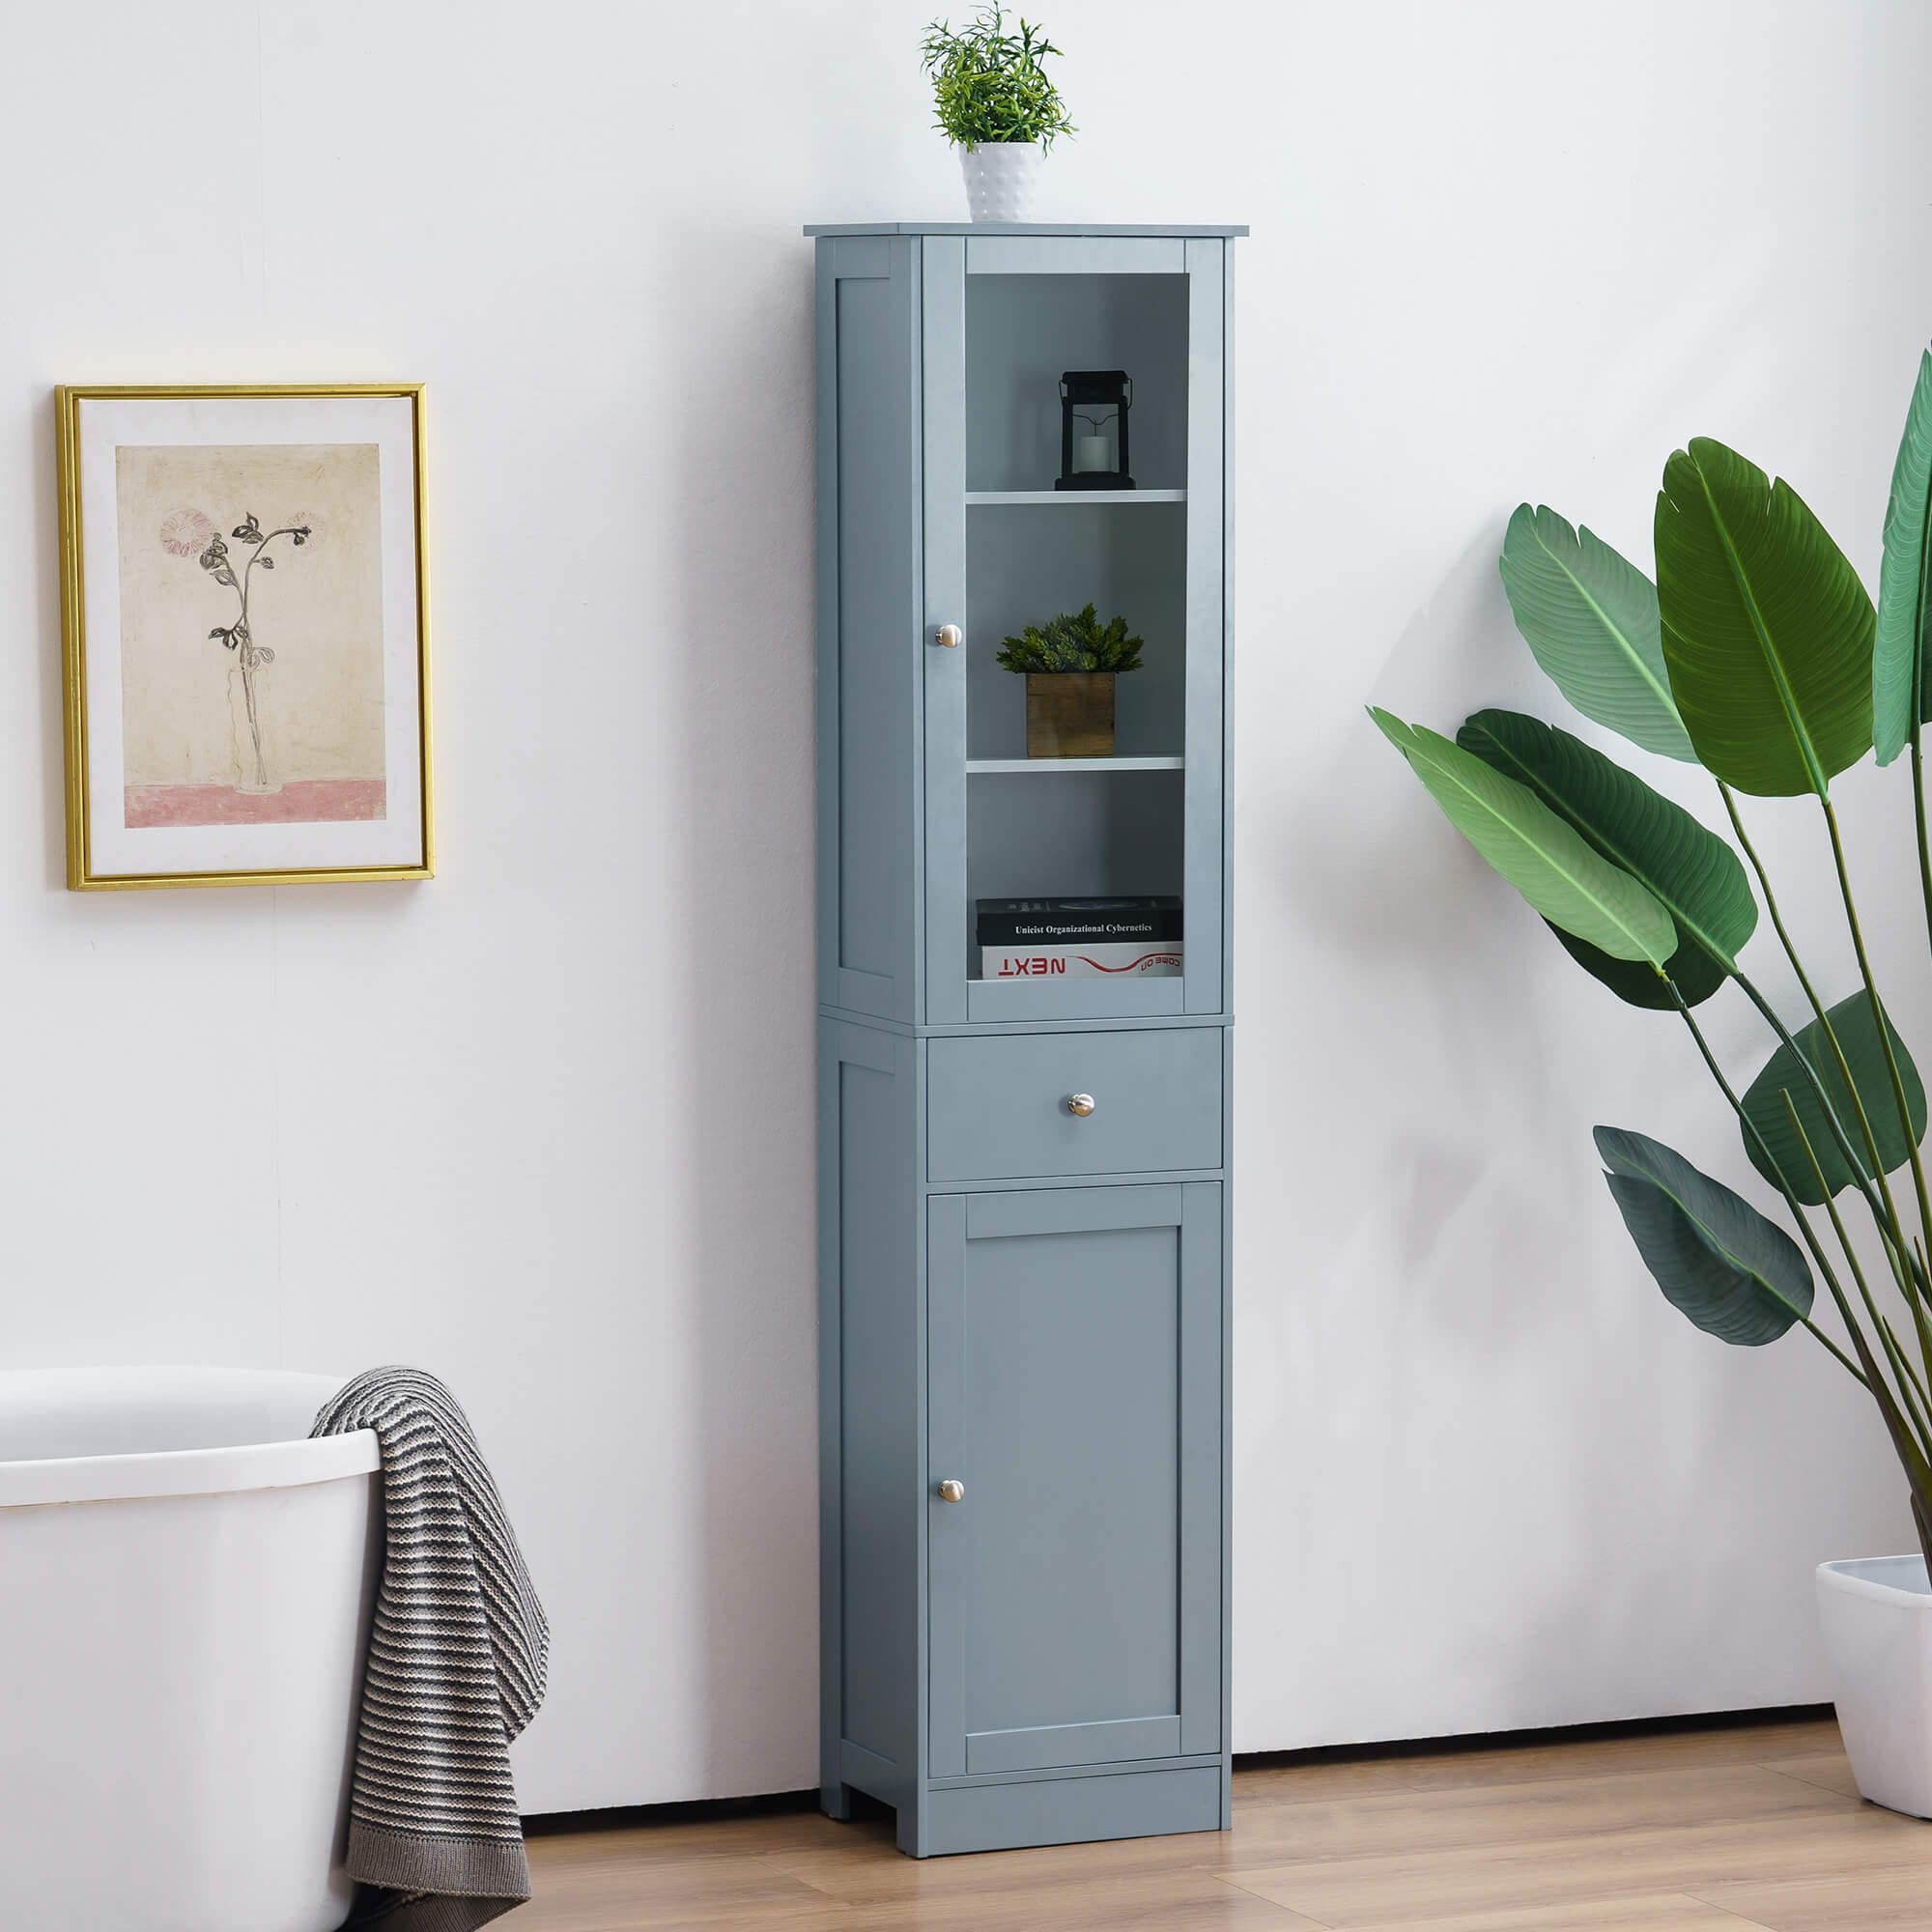 https://ak1.ostkcdn.com/images/products/is/images/direct/75fb5a6dbdf2ee8bdabaa2bbfd0e97123452fb43/Ivinta-Bathroom-Storage-Cabinet%2C-Floor-Standing-Organizer-Cabinet%2C-Slim-Bathroom-Tower-Cabinet.jpg